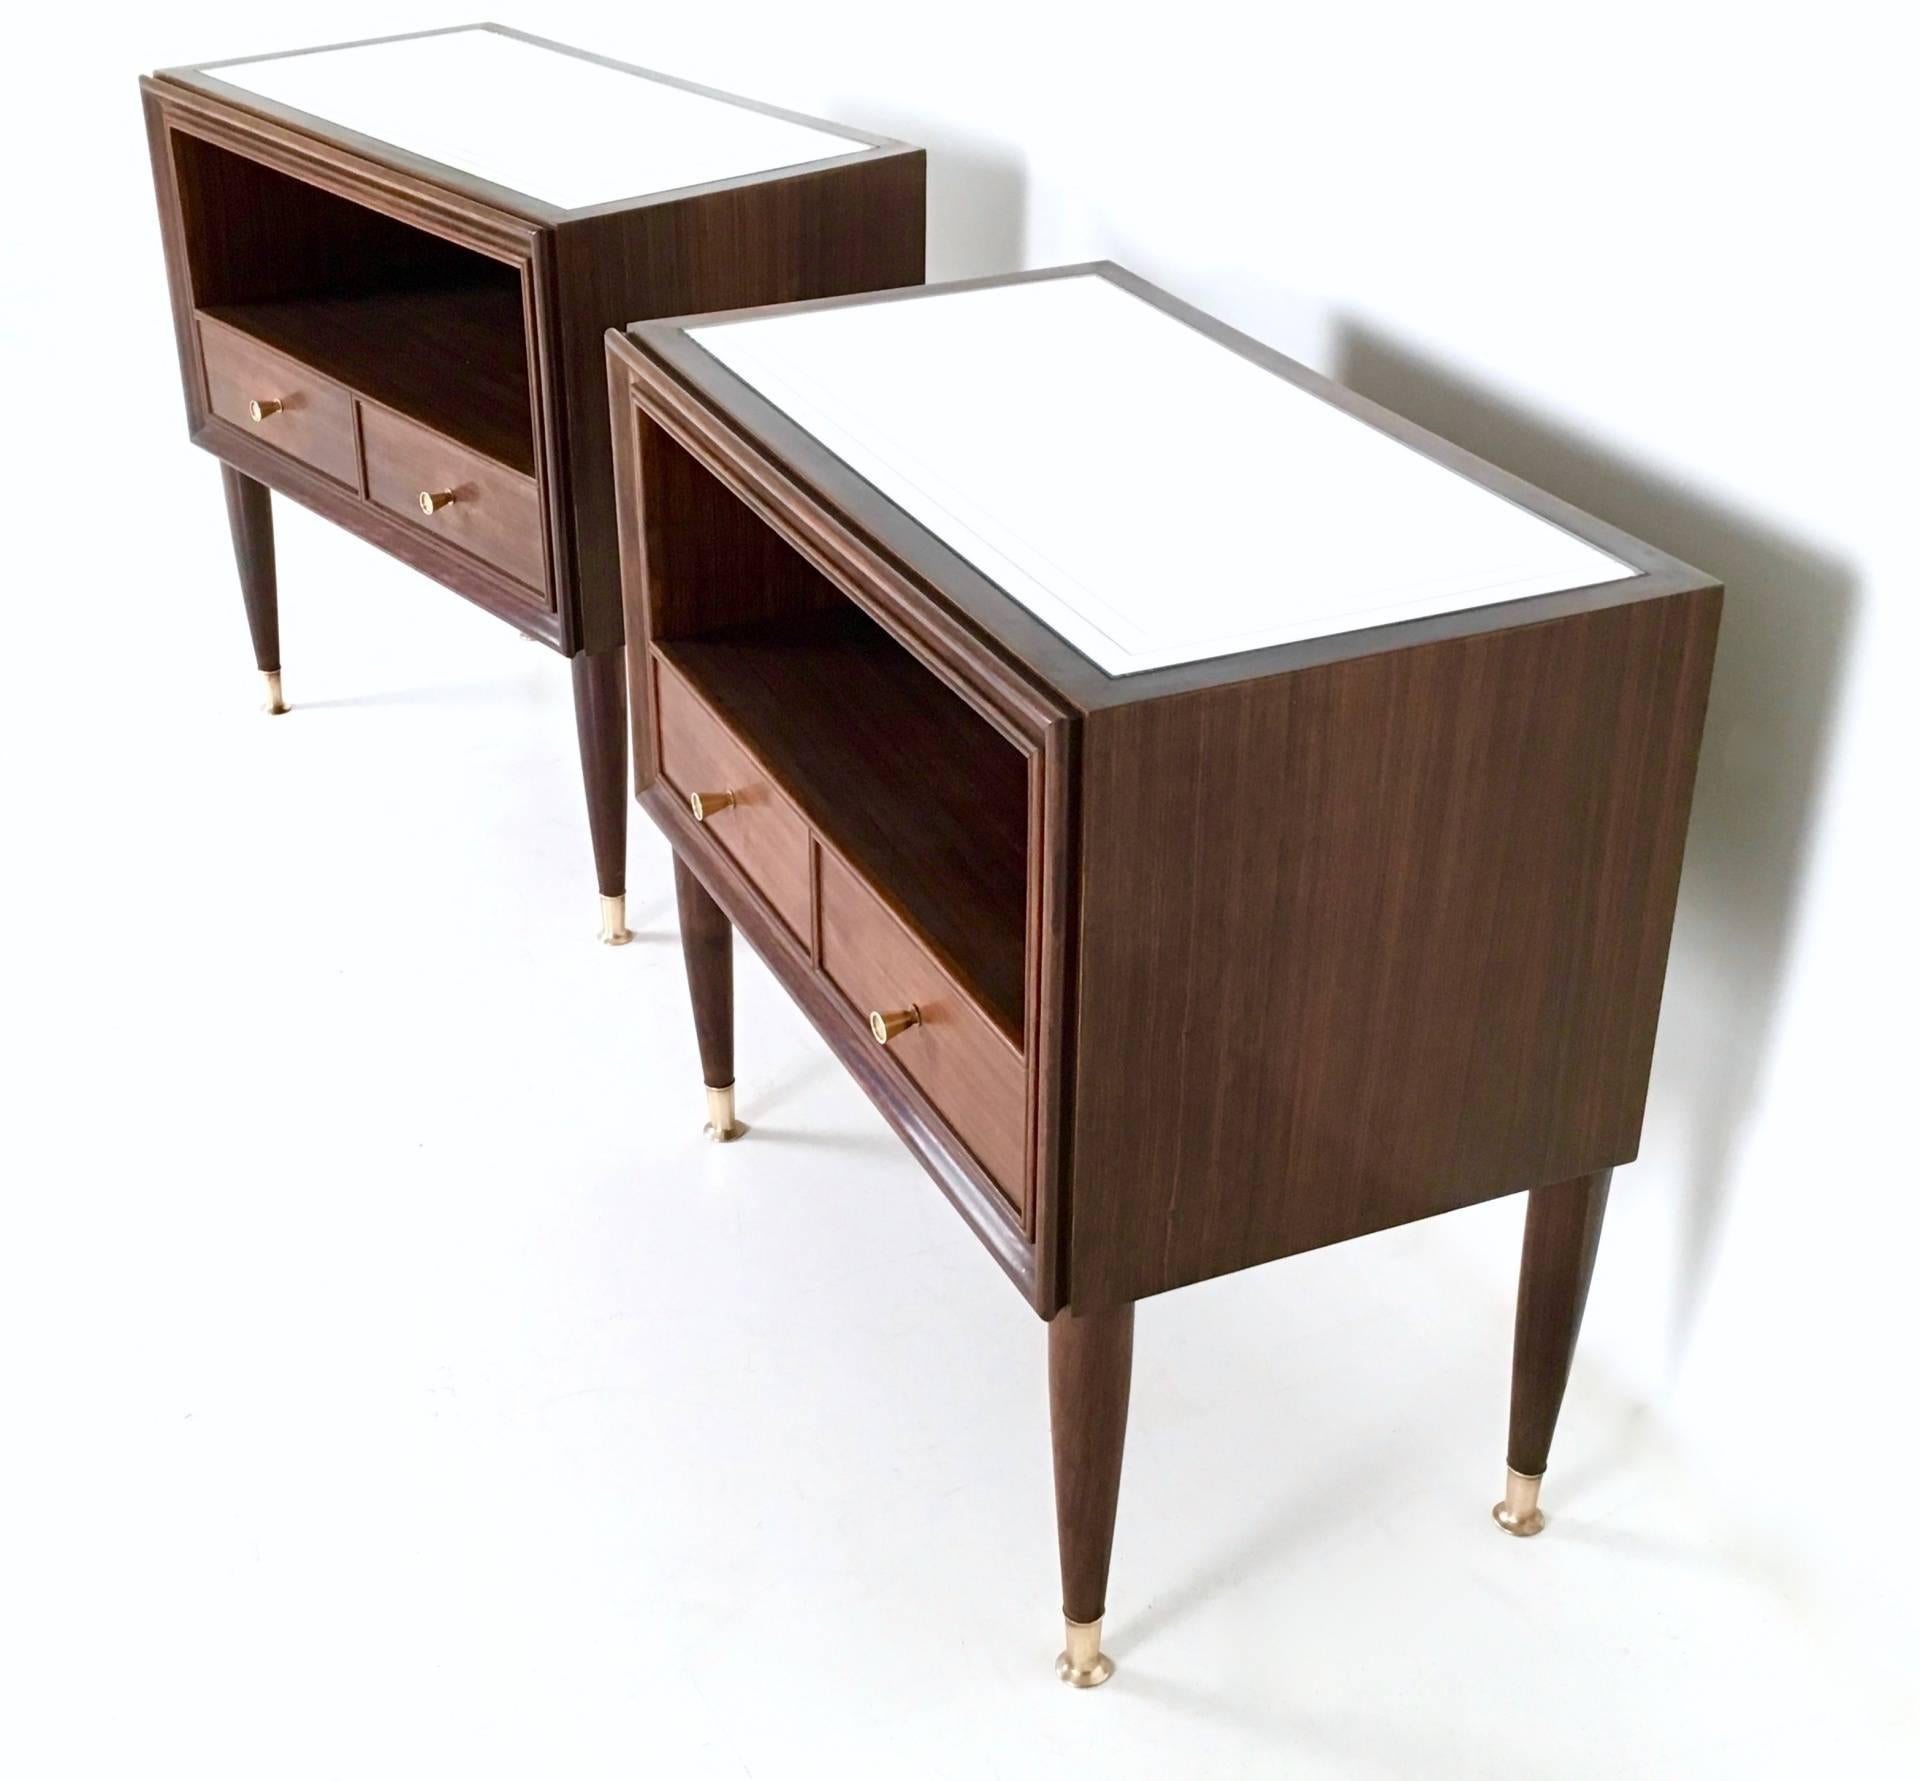 These two high-quality nightstands are made in mahogany and feature a mirror top and brass handles and feet caps. 
In perfect original condition and they don't need to be restored. 
They were part of 